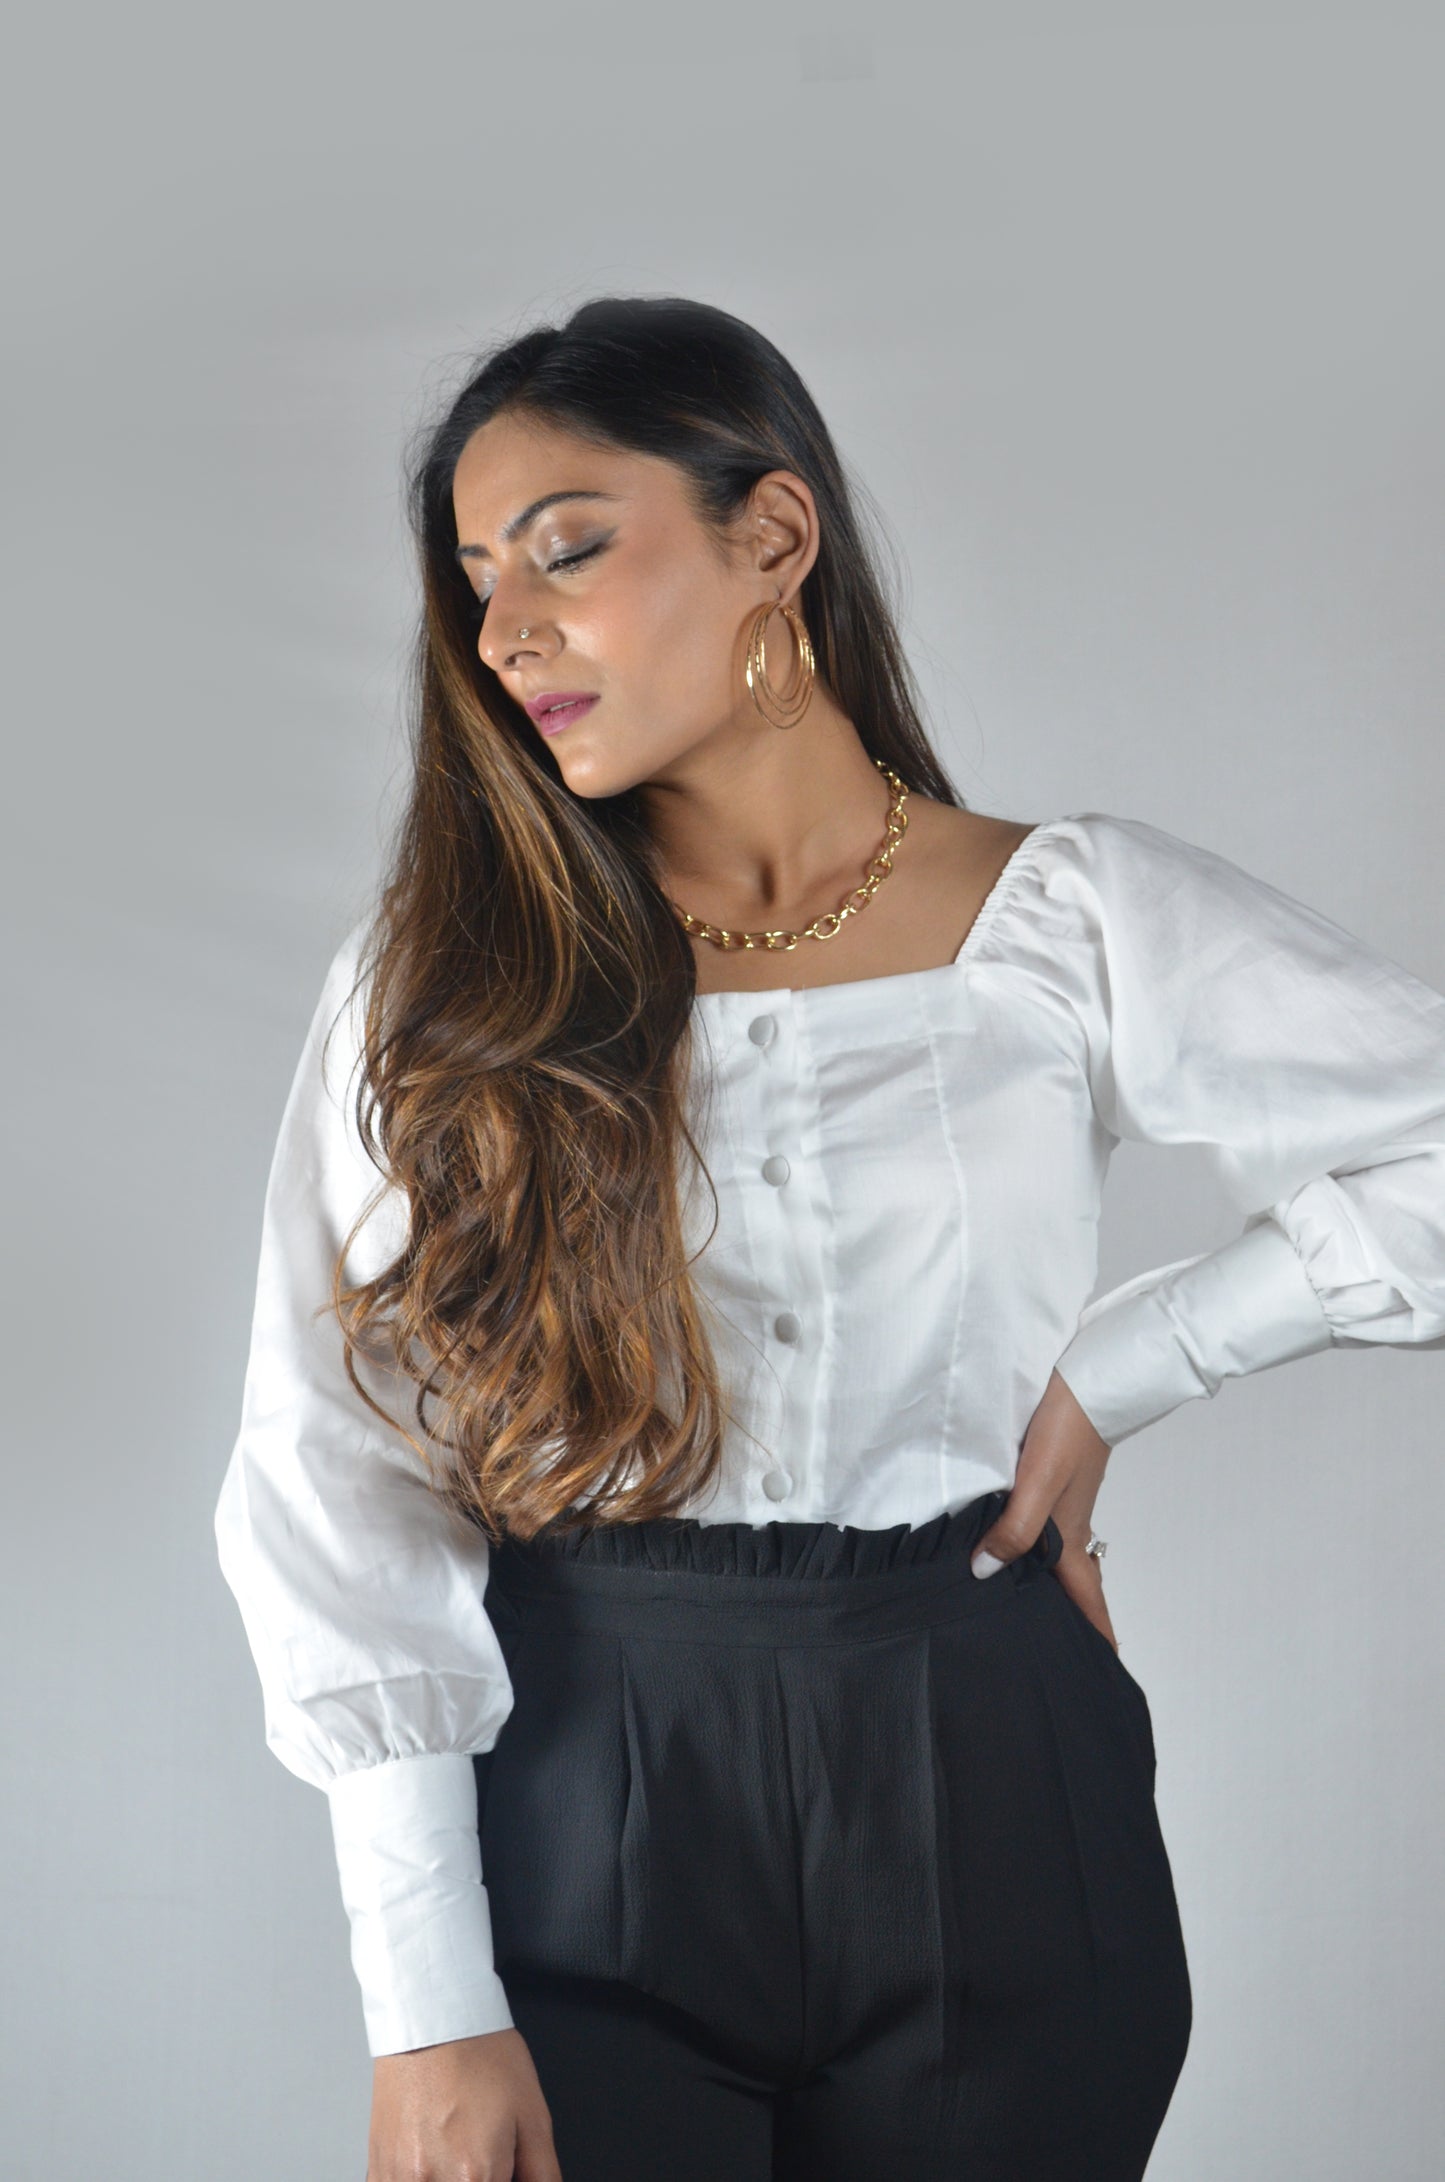 women western wear fashion. Classic white shirt with balloon sleeves. Formal wear, office wear, casual top, party tops